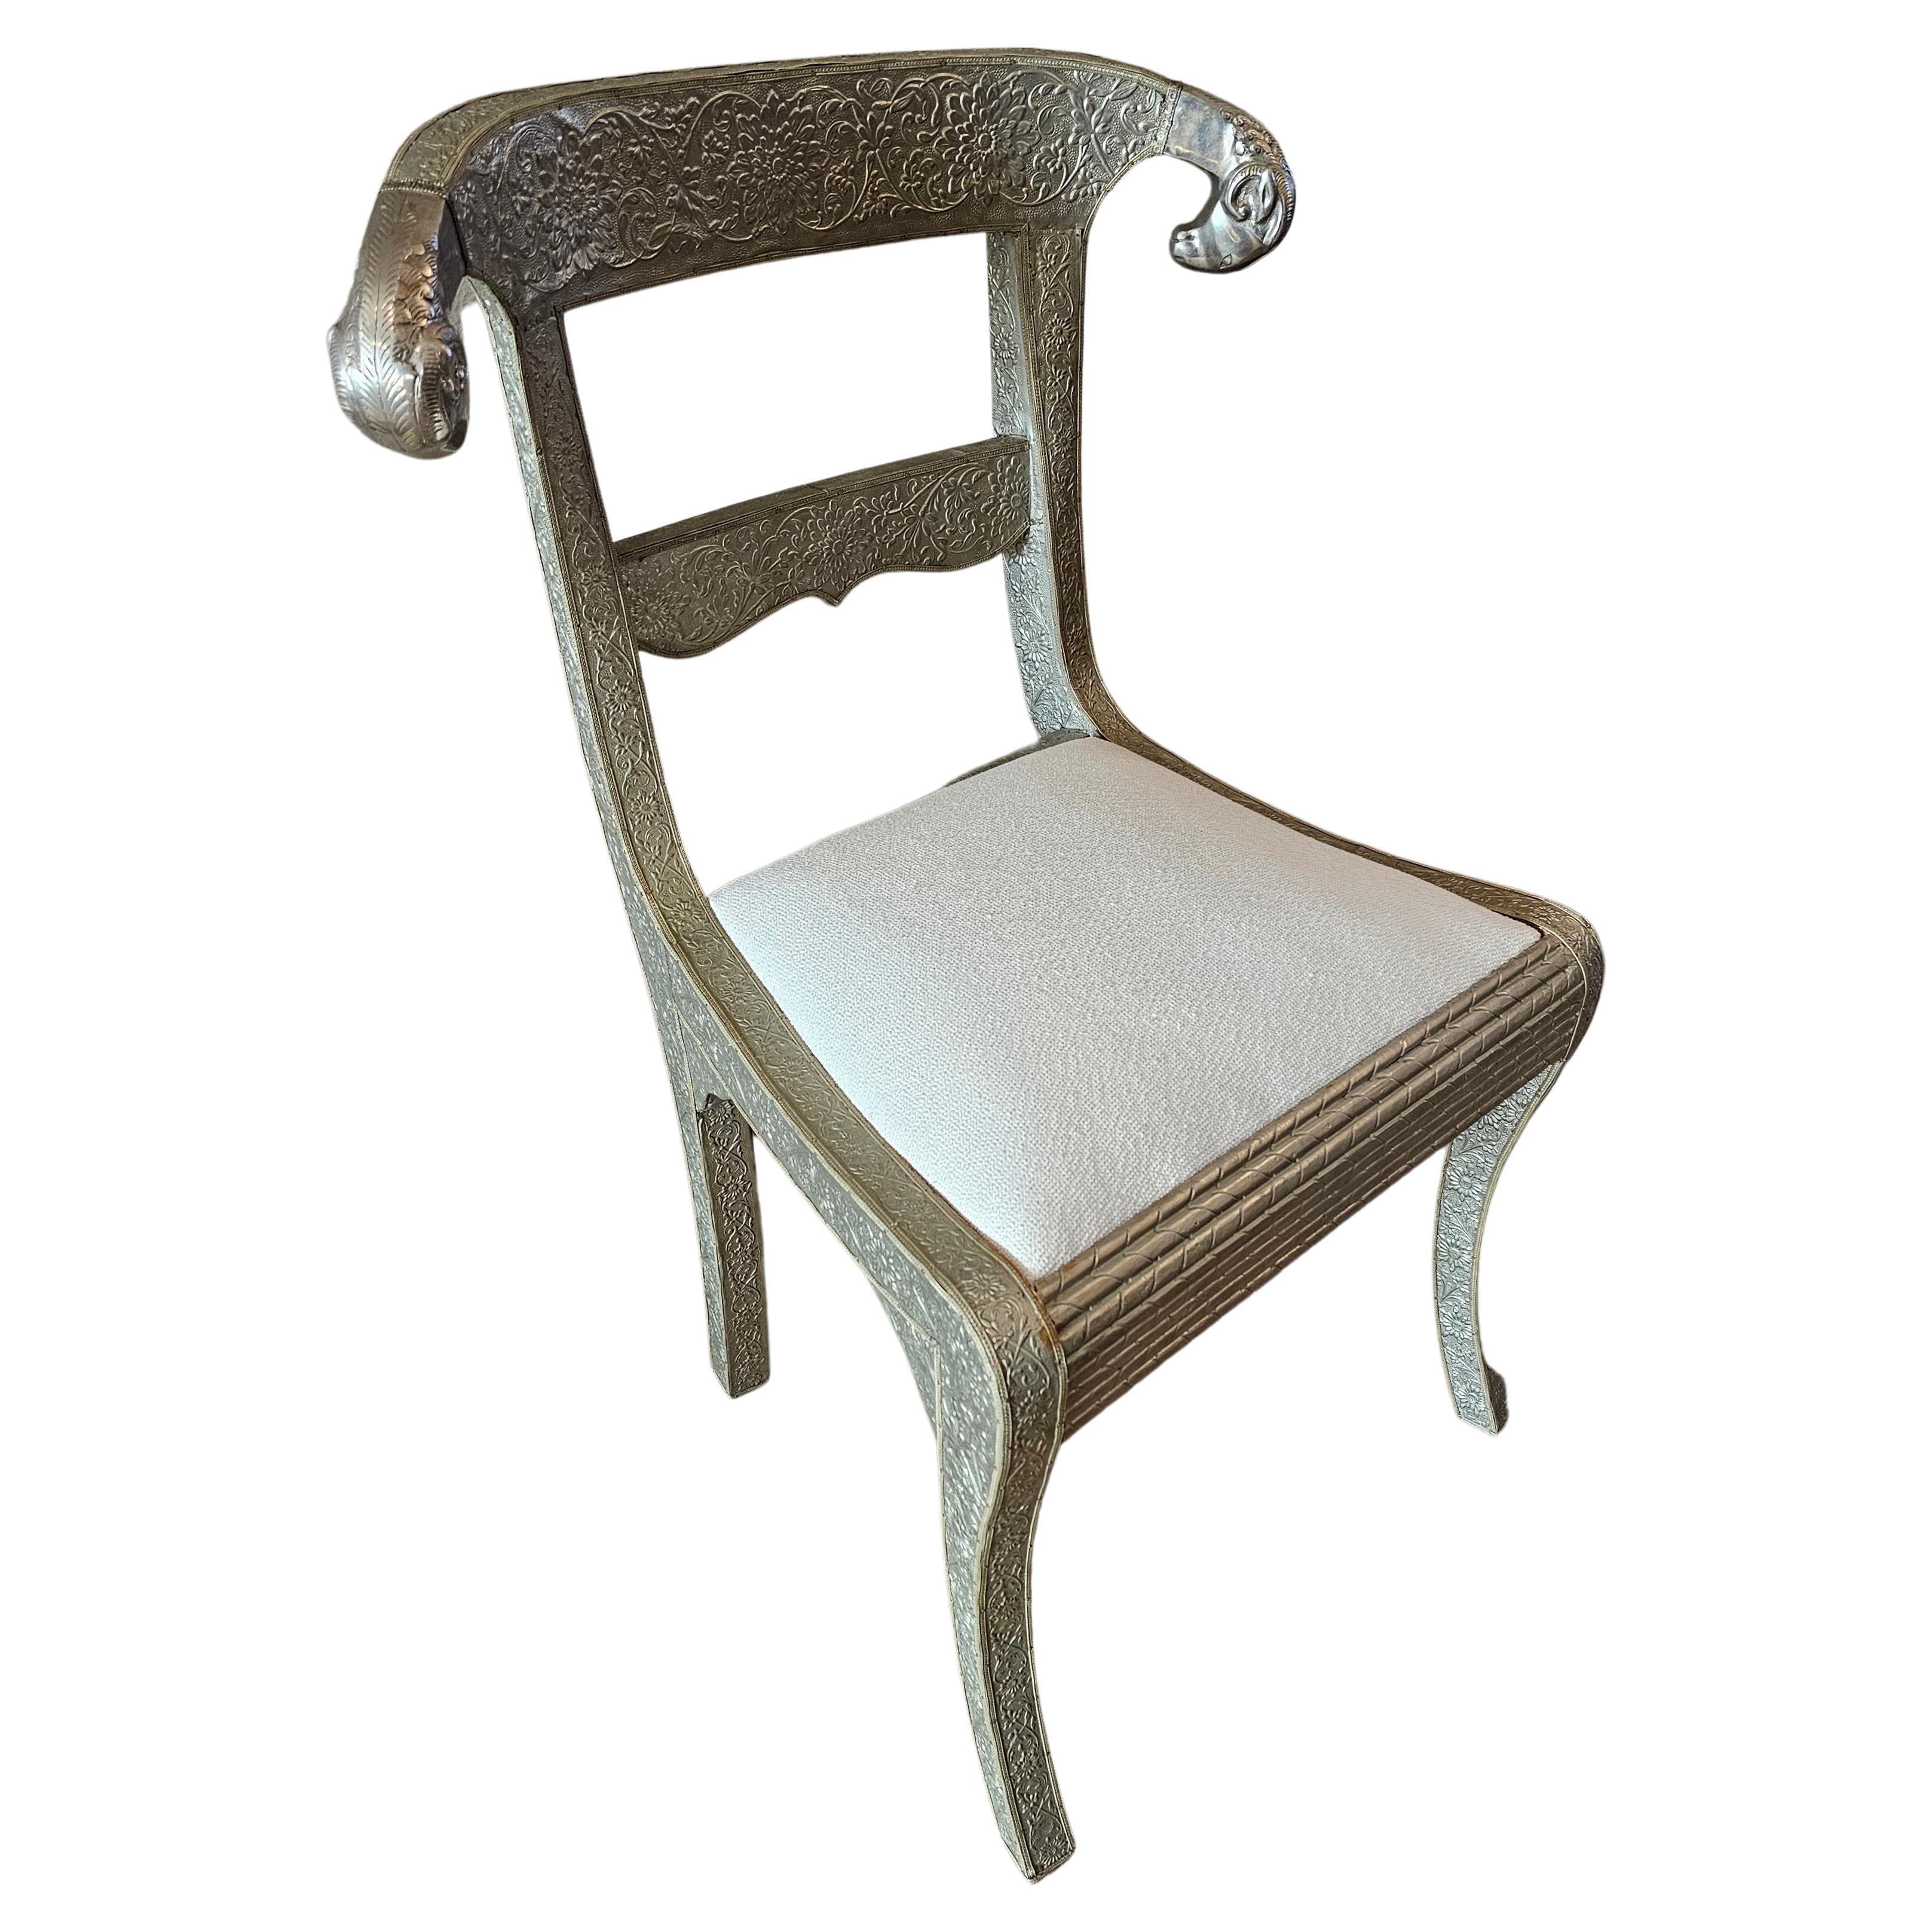 Anglo-Indian Silvered Metal-Clad Chair